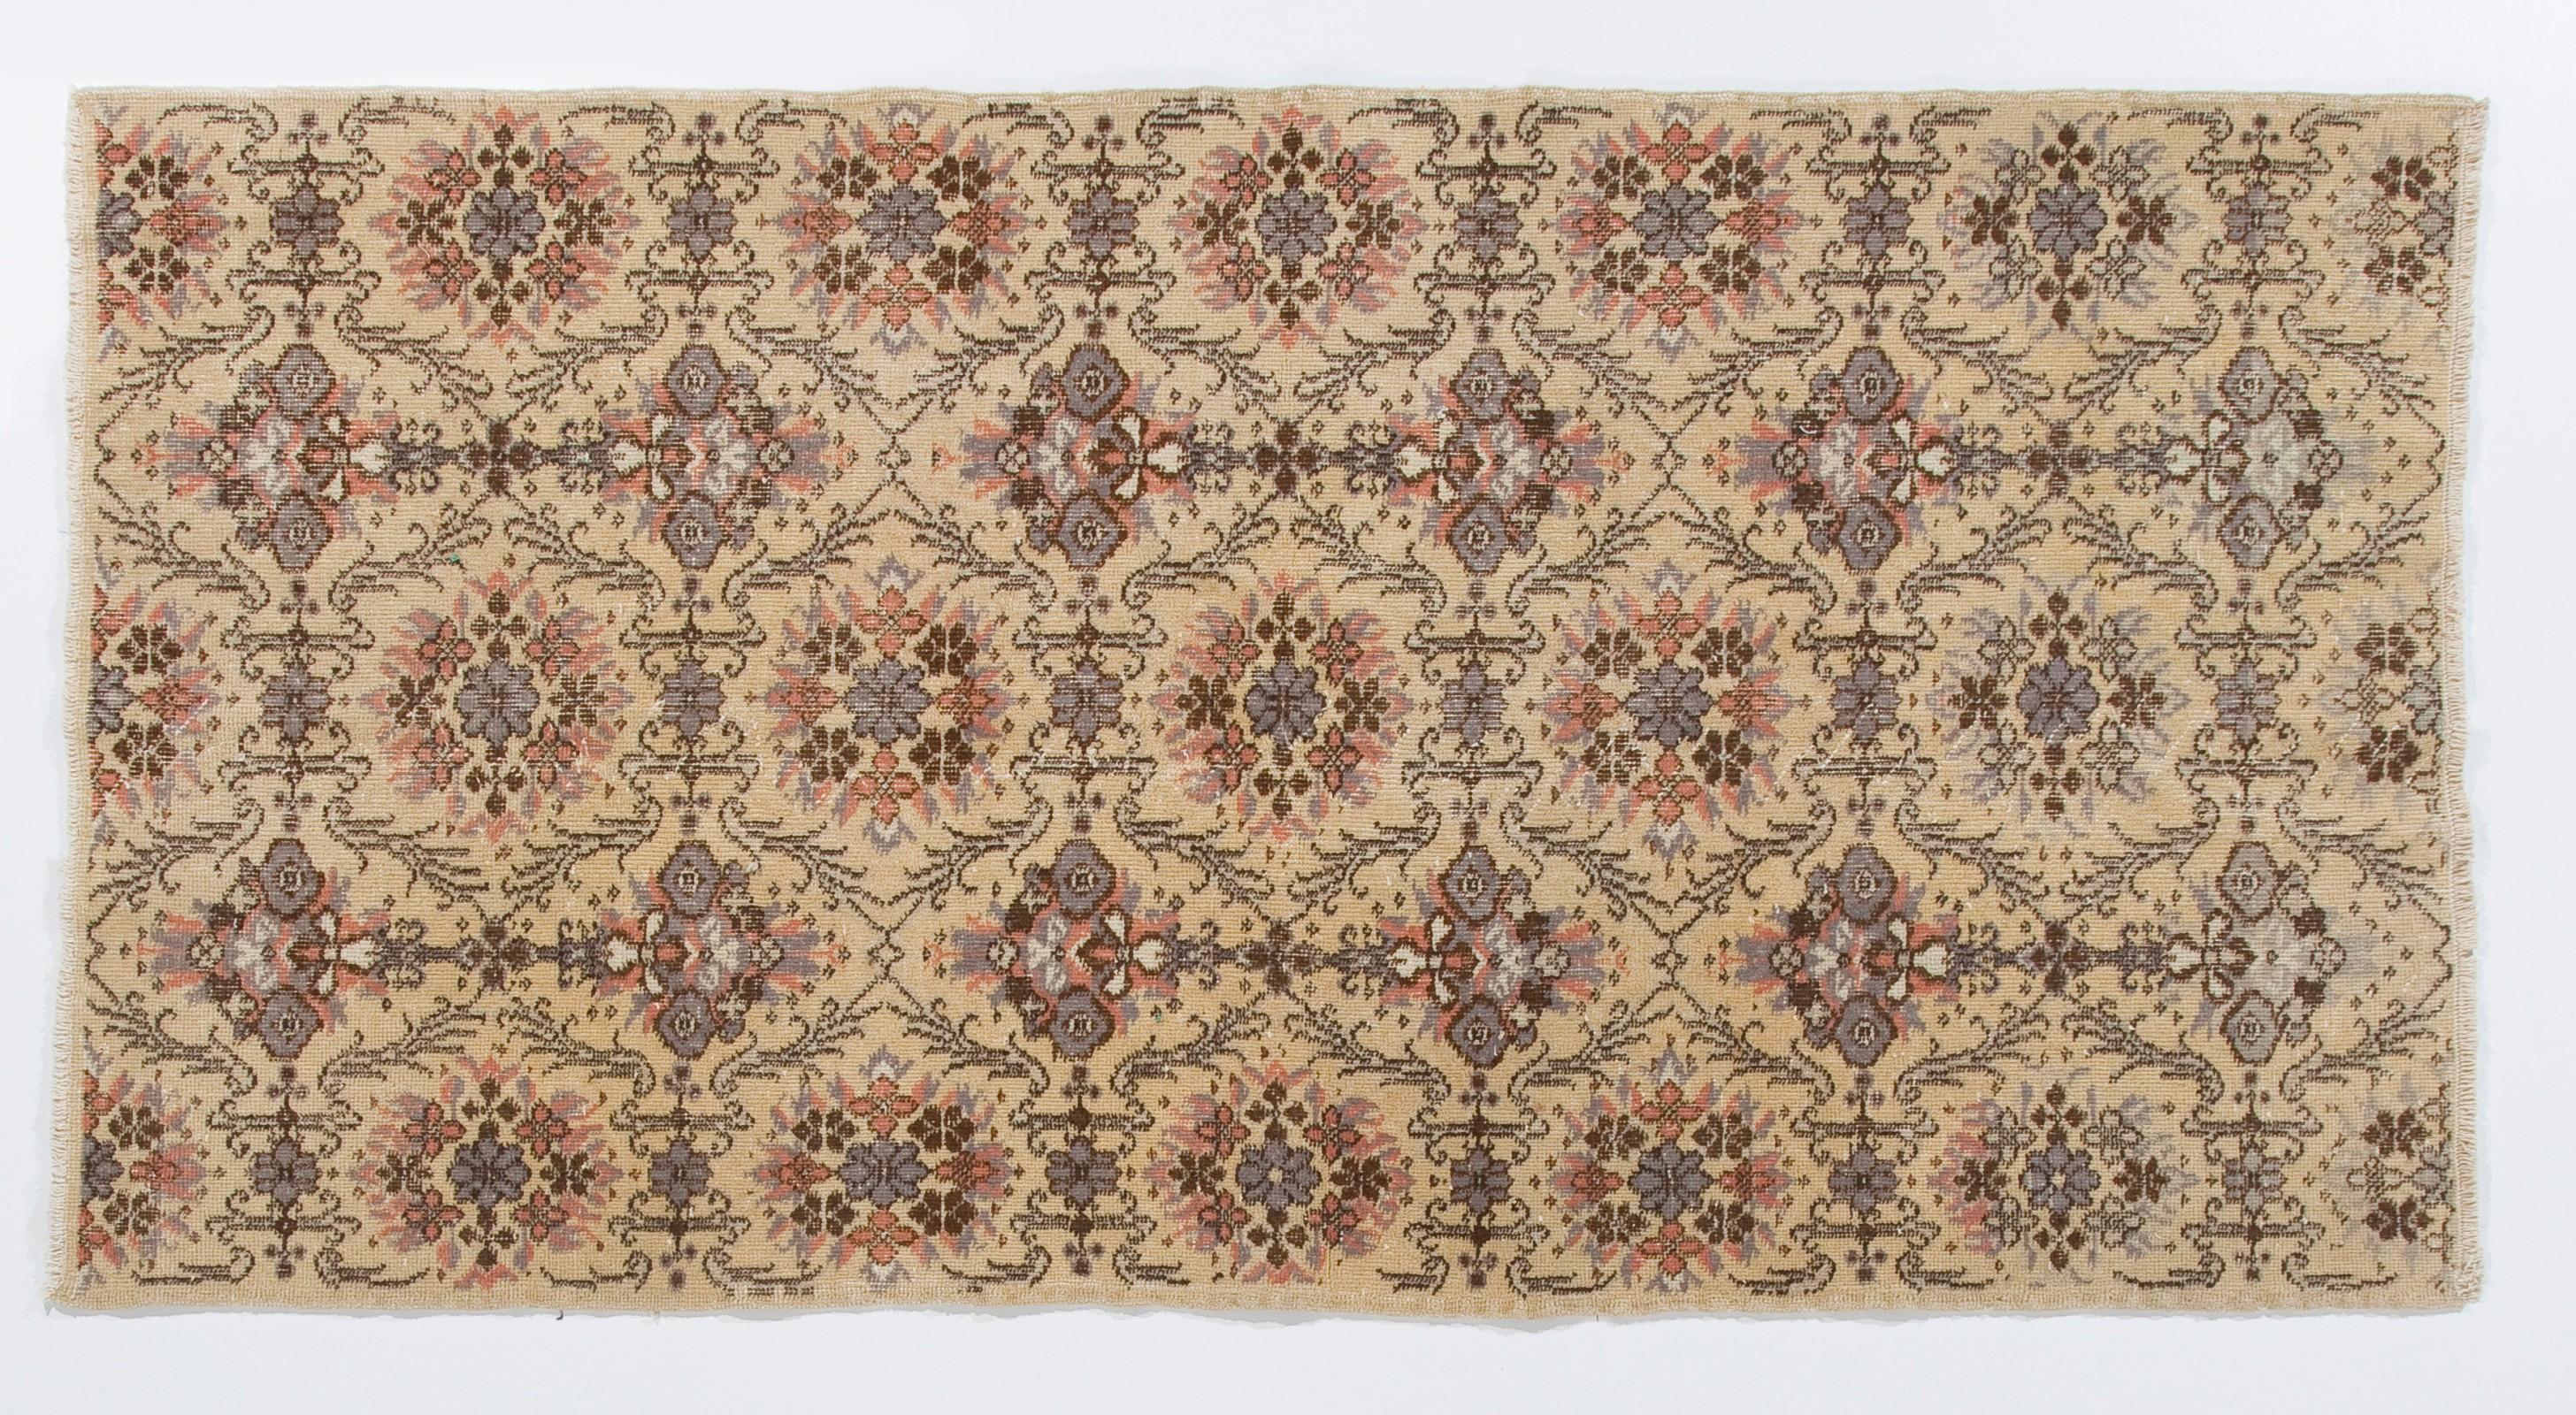 20th Century 3.8x7.3 ft Hand-Knotted Vintage Floral Design Turkish Rug, Woolen Floor Covering For Sale